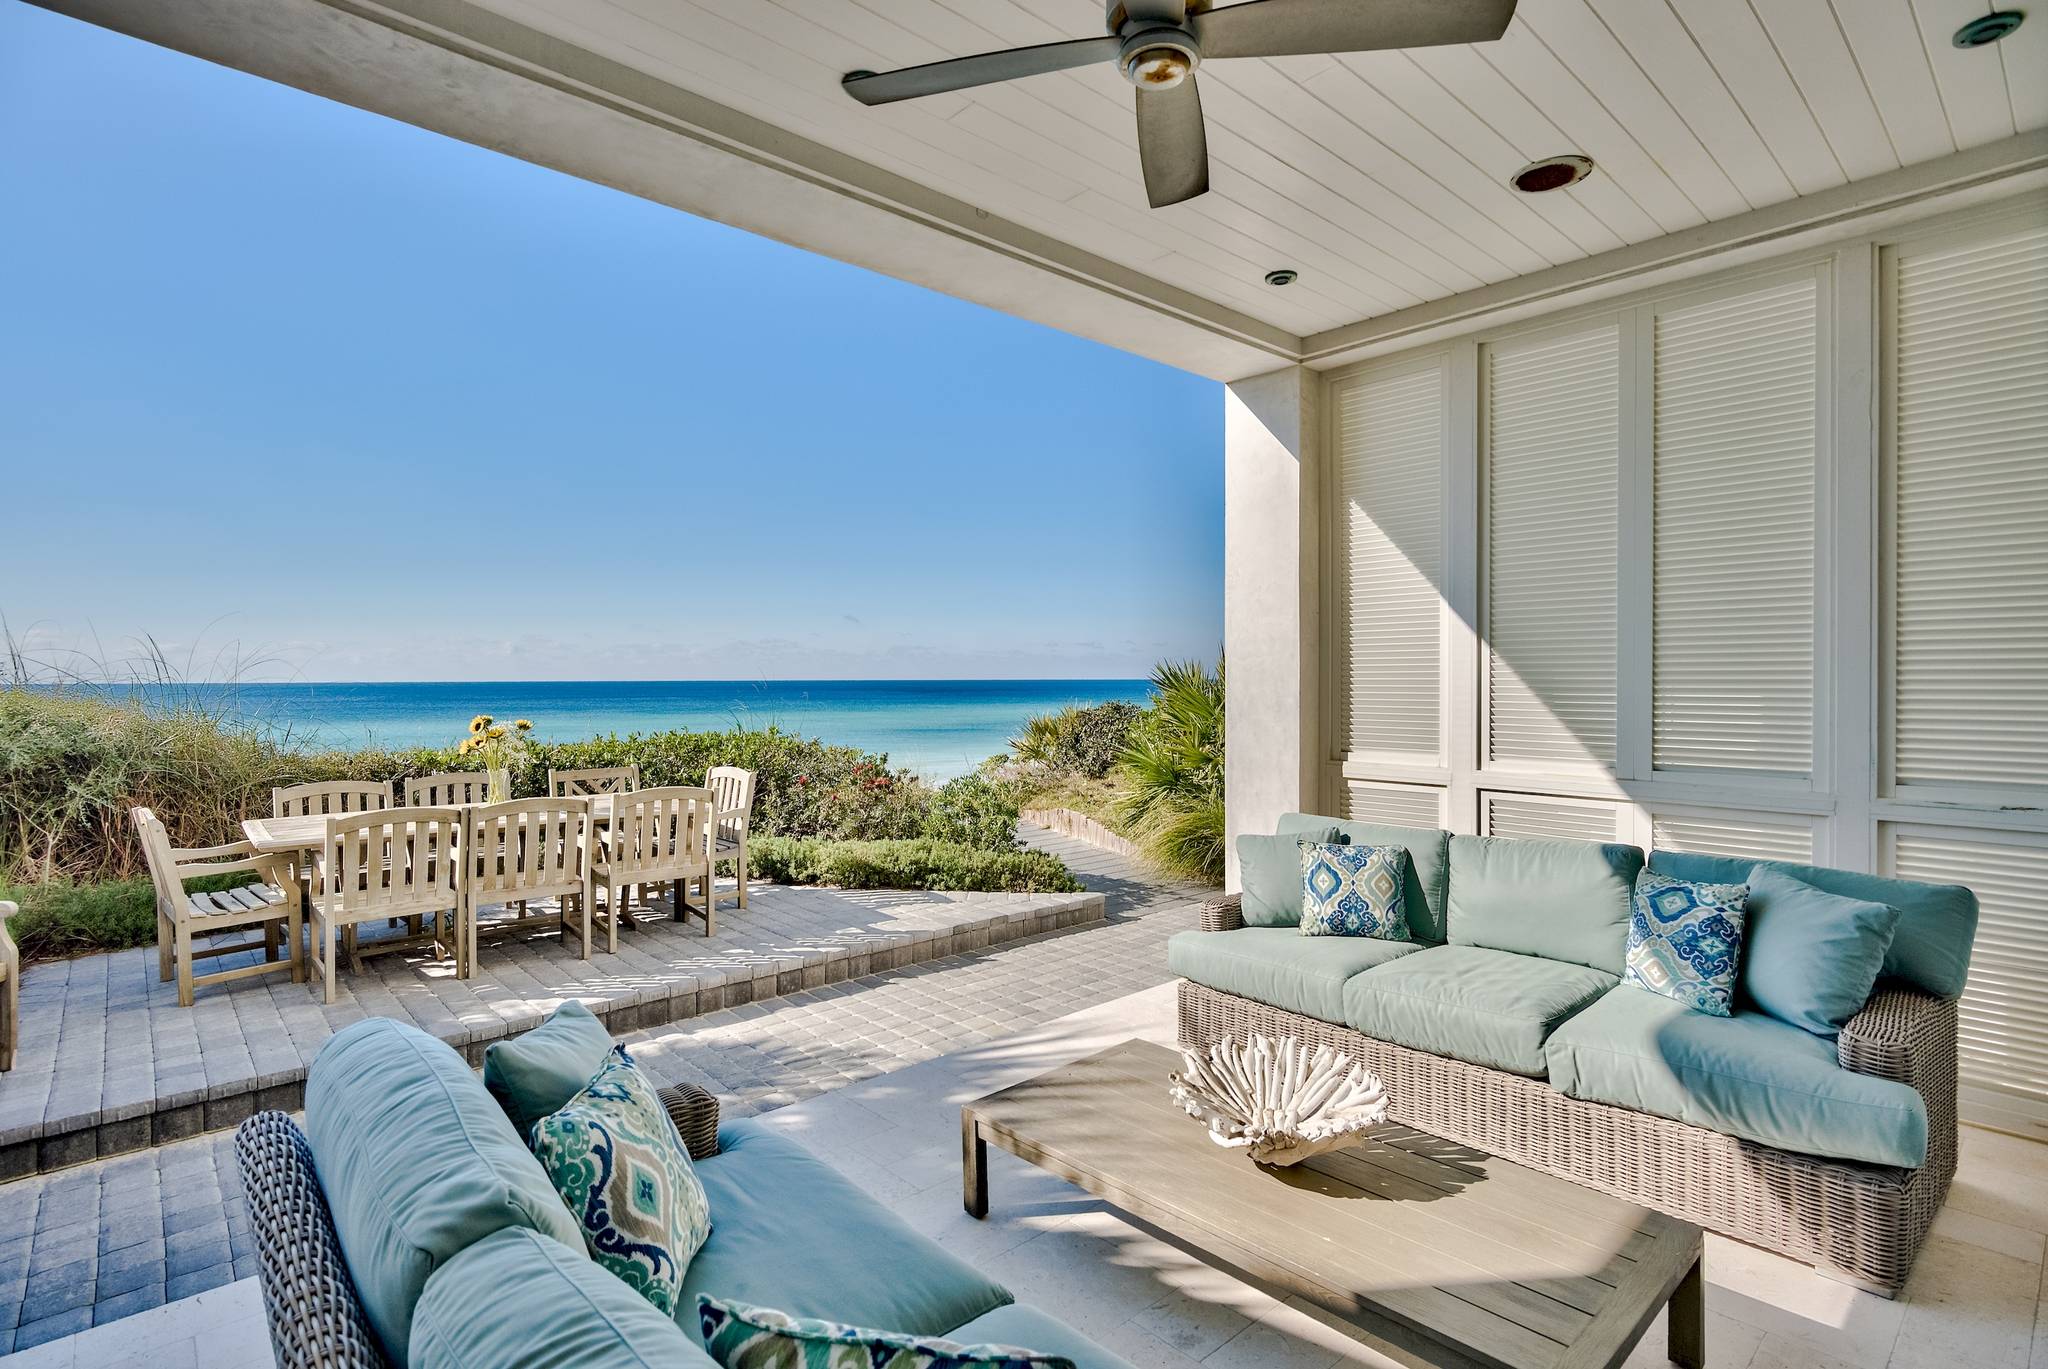 30A Gulf Front Vacation Rental